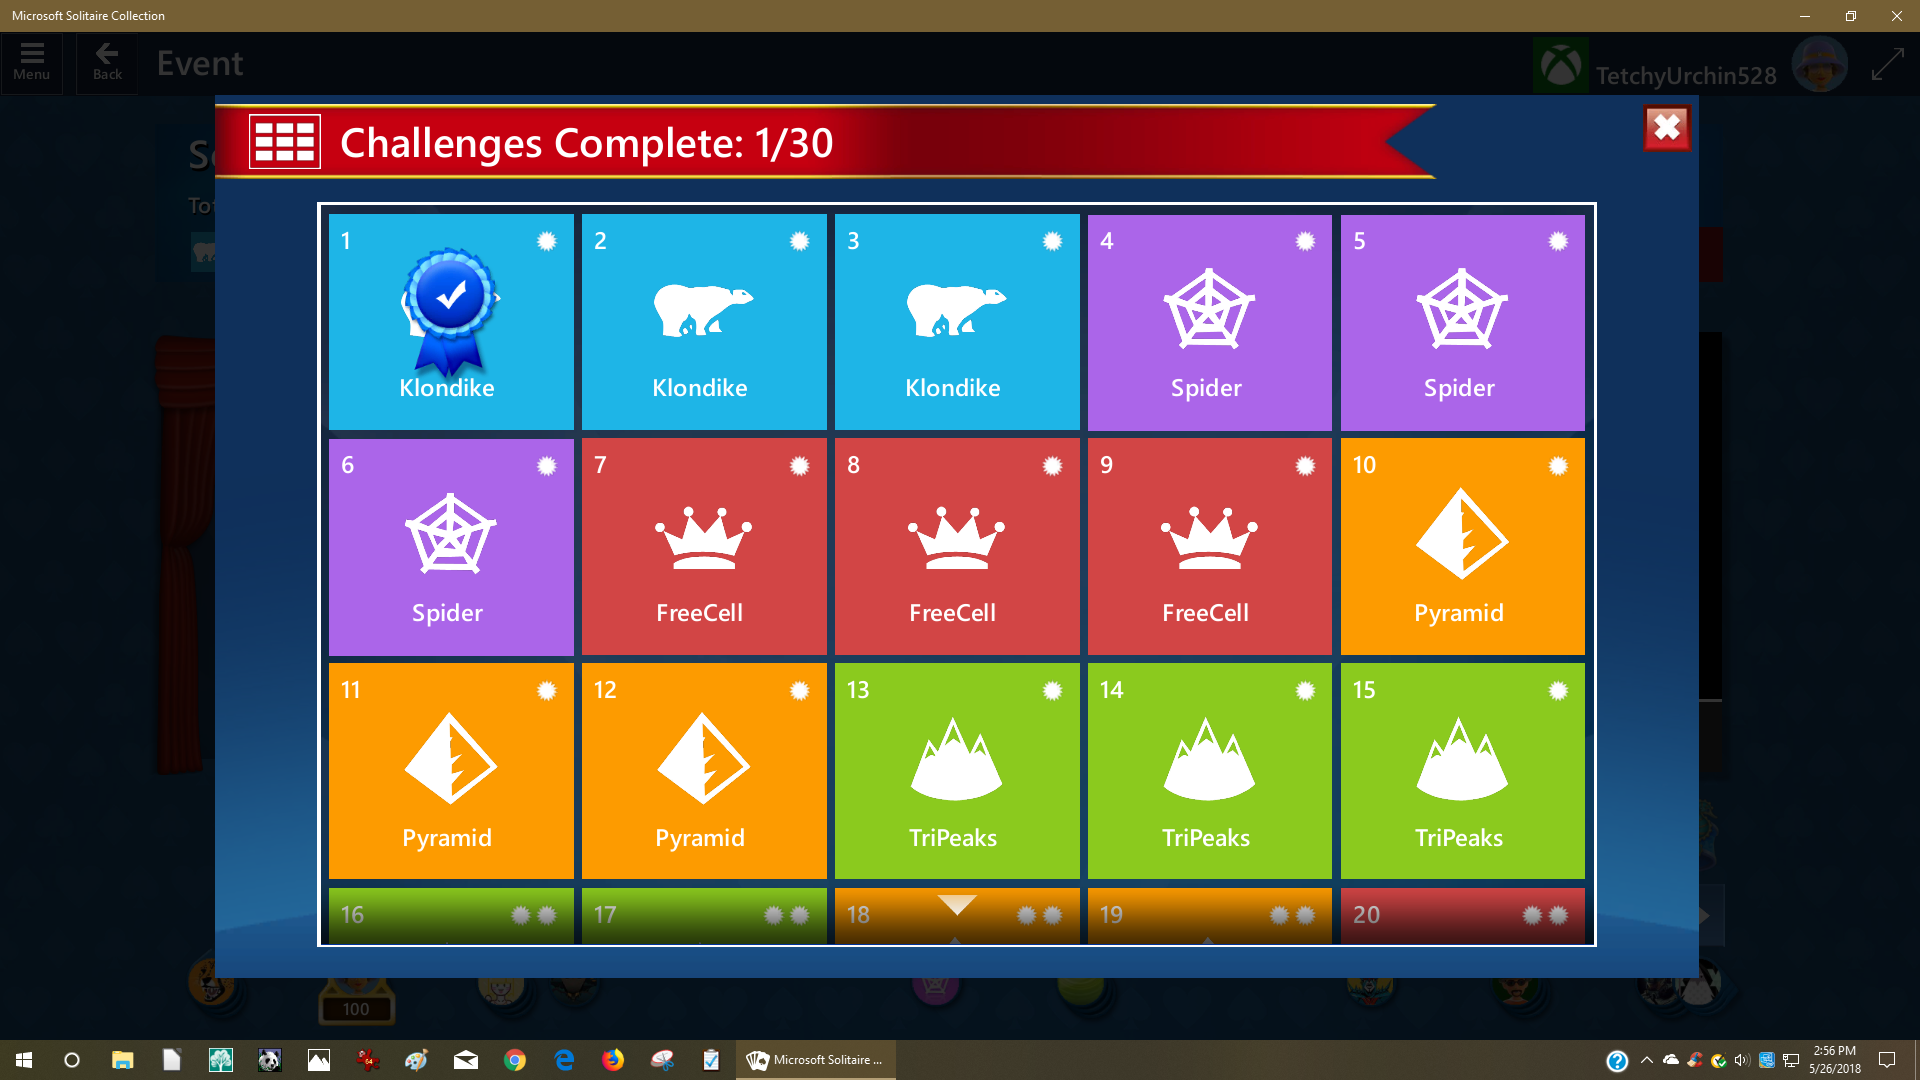 Event challenges in Microsoft Solitaire doesn't show properly [​IMG]